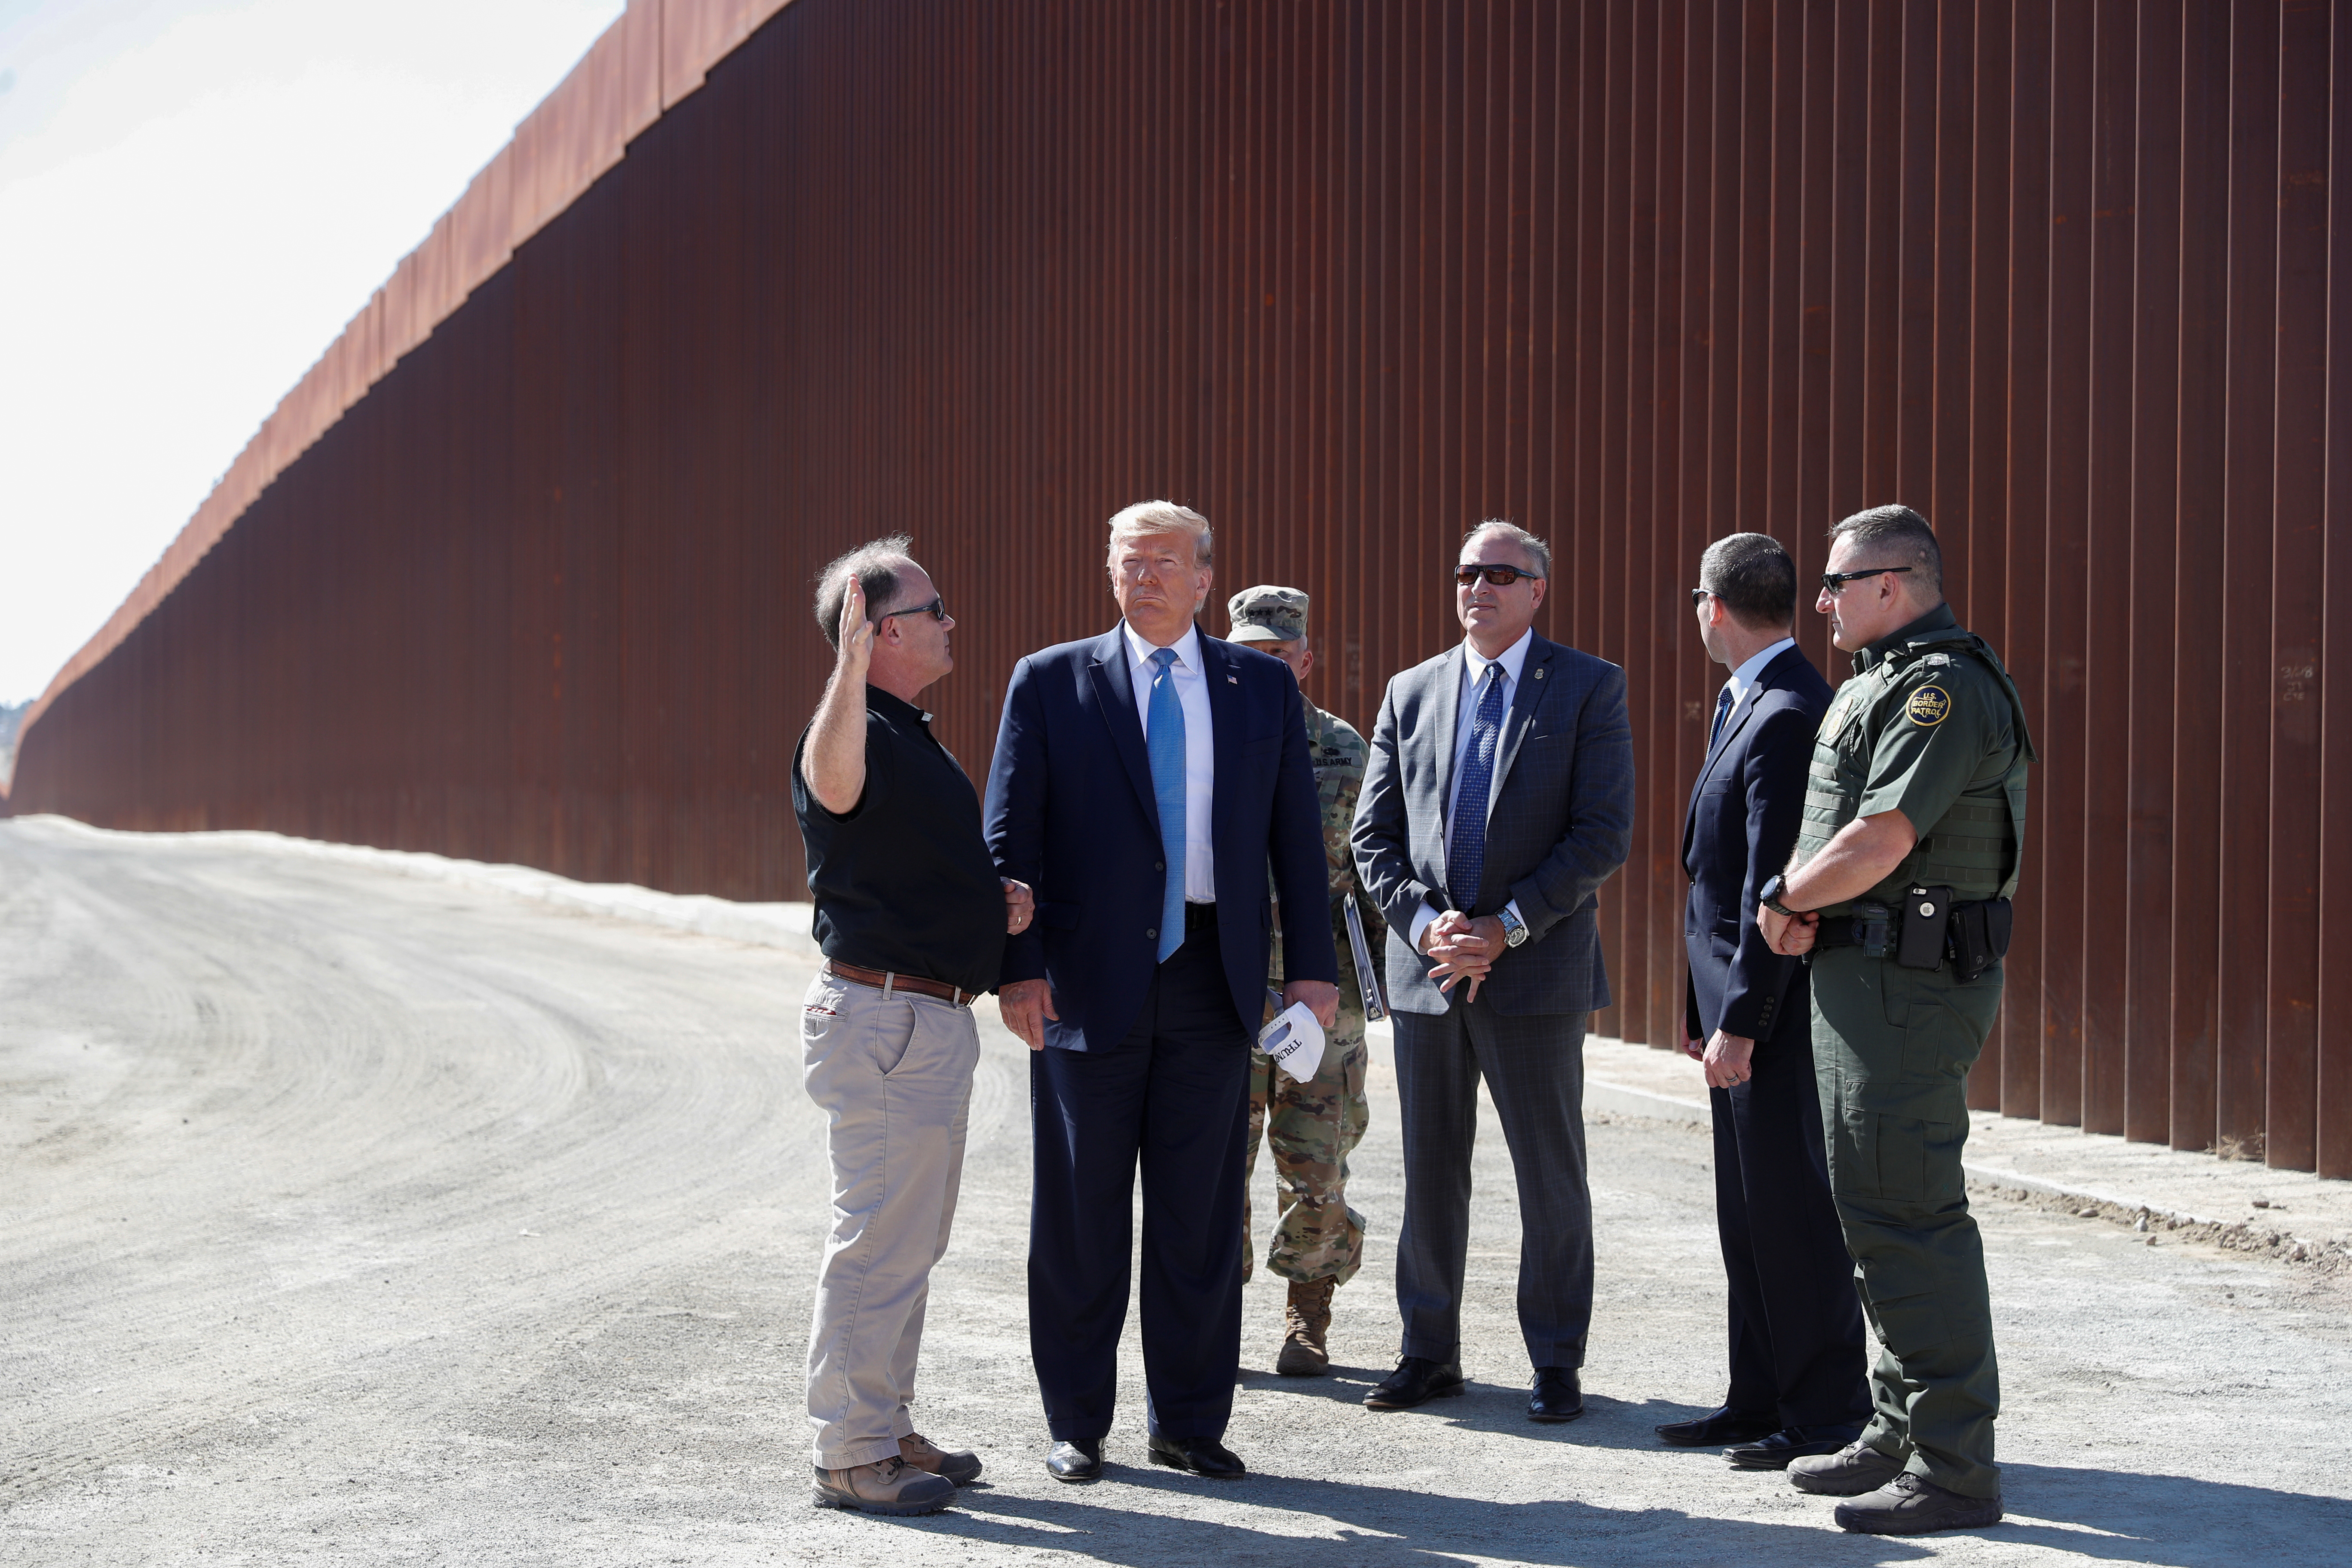 U.S. President Donald Trump visits a section of the U.S.-Mexico border wall in Otay Mesa